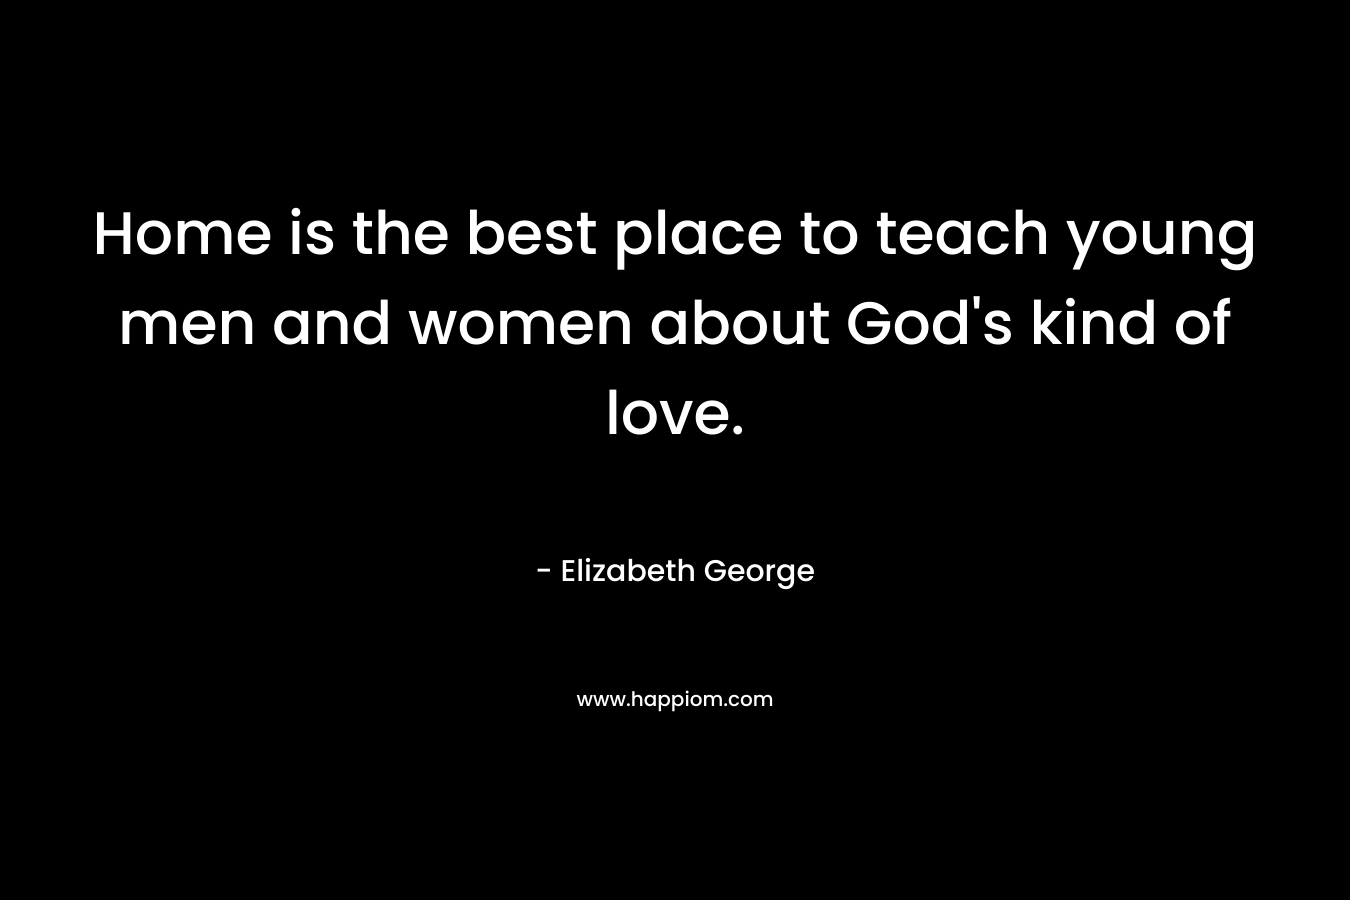 Home is the best place to teach young men and women about God's kind of love.